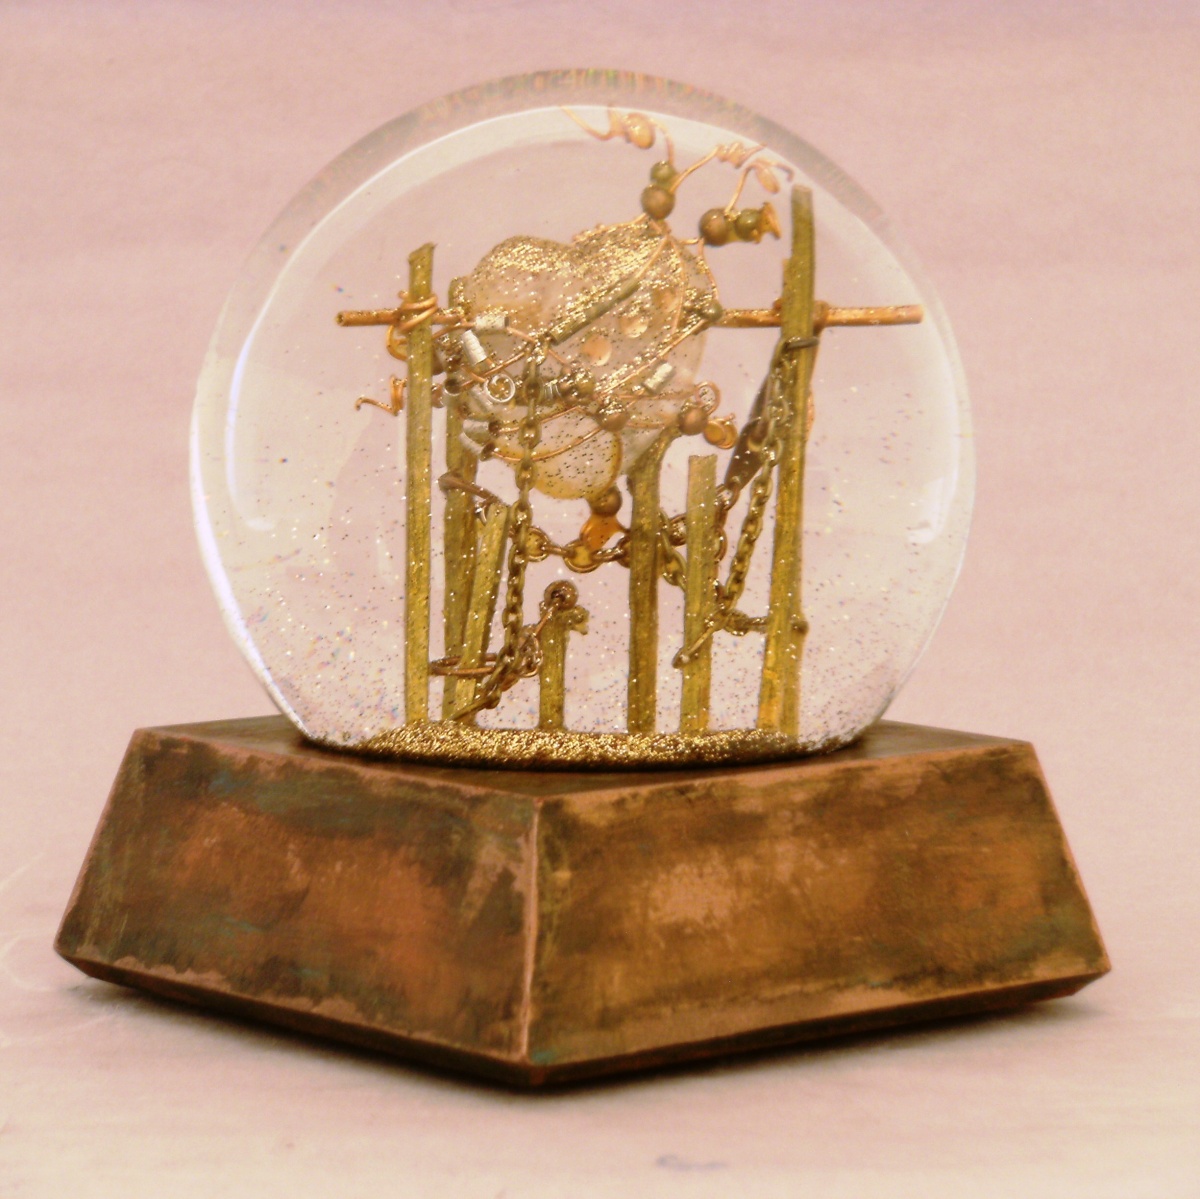 Mended Heart Snow Globe, Camryn Forrest Designs 2013